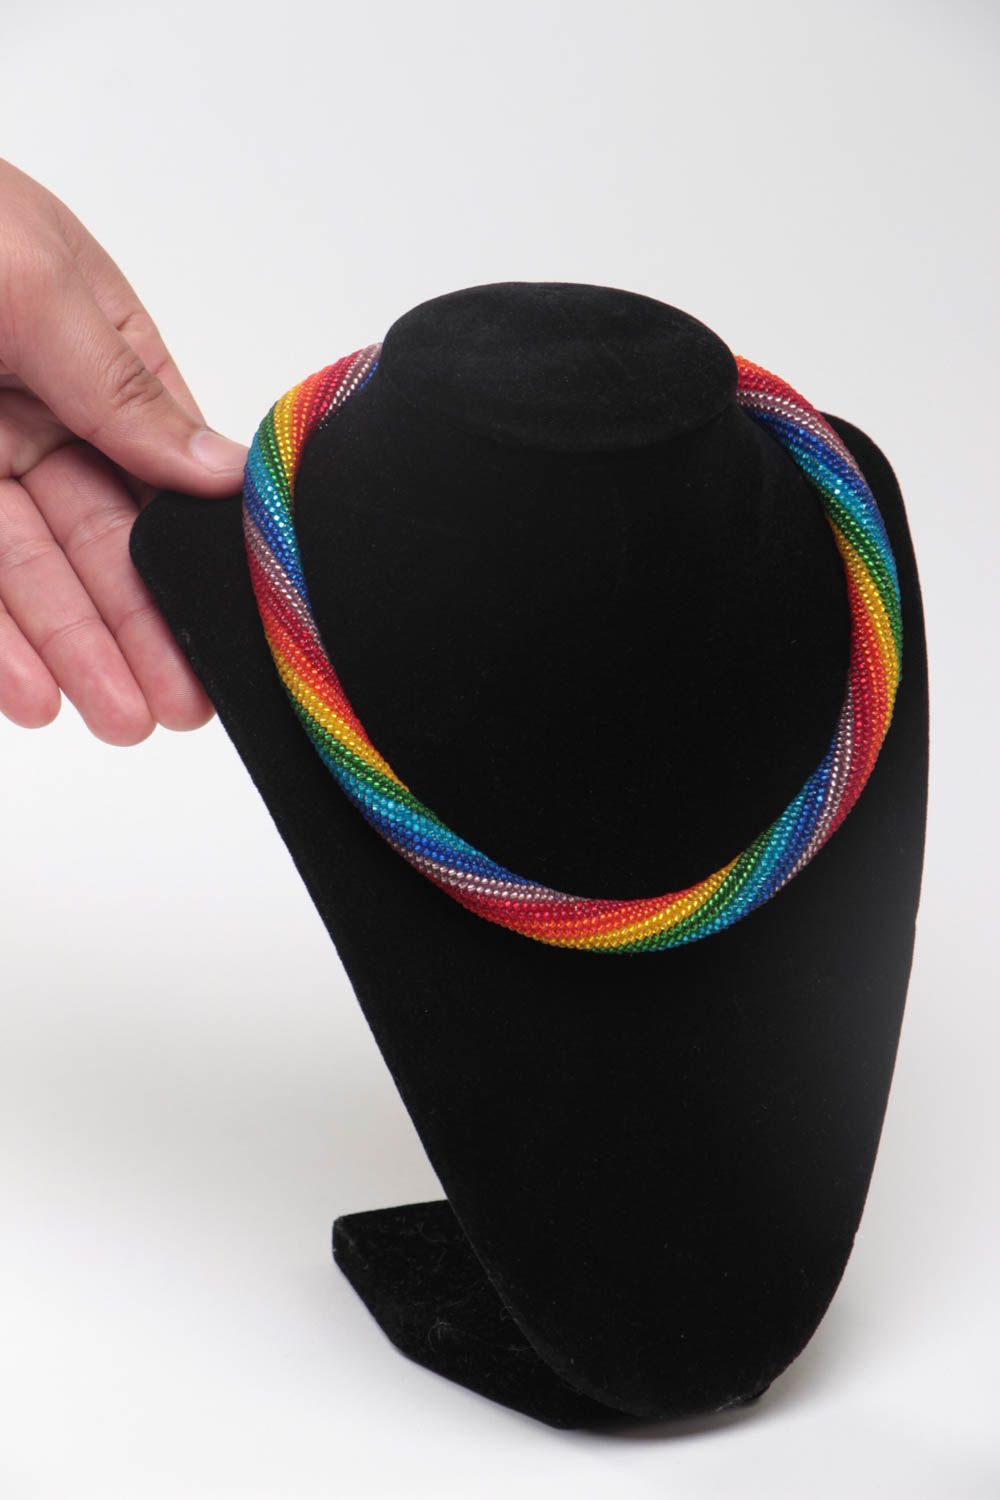 Handmade designer beaded woven cord necklace of rainbow color for women photo 5